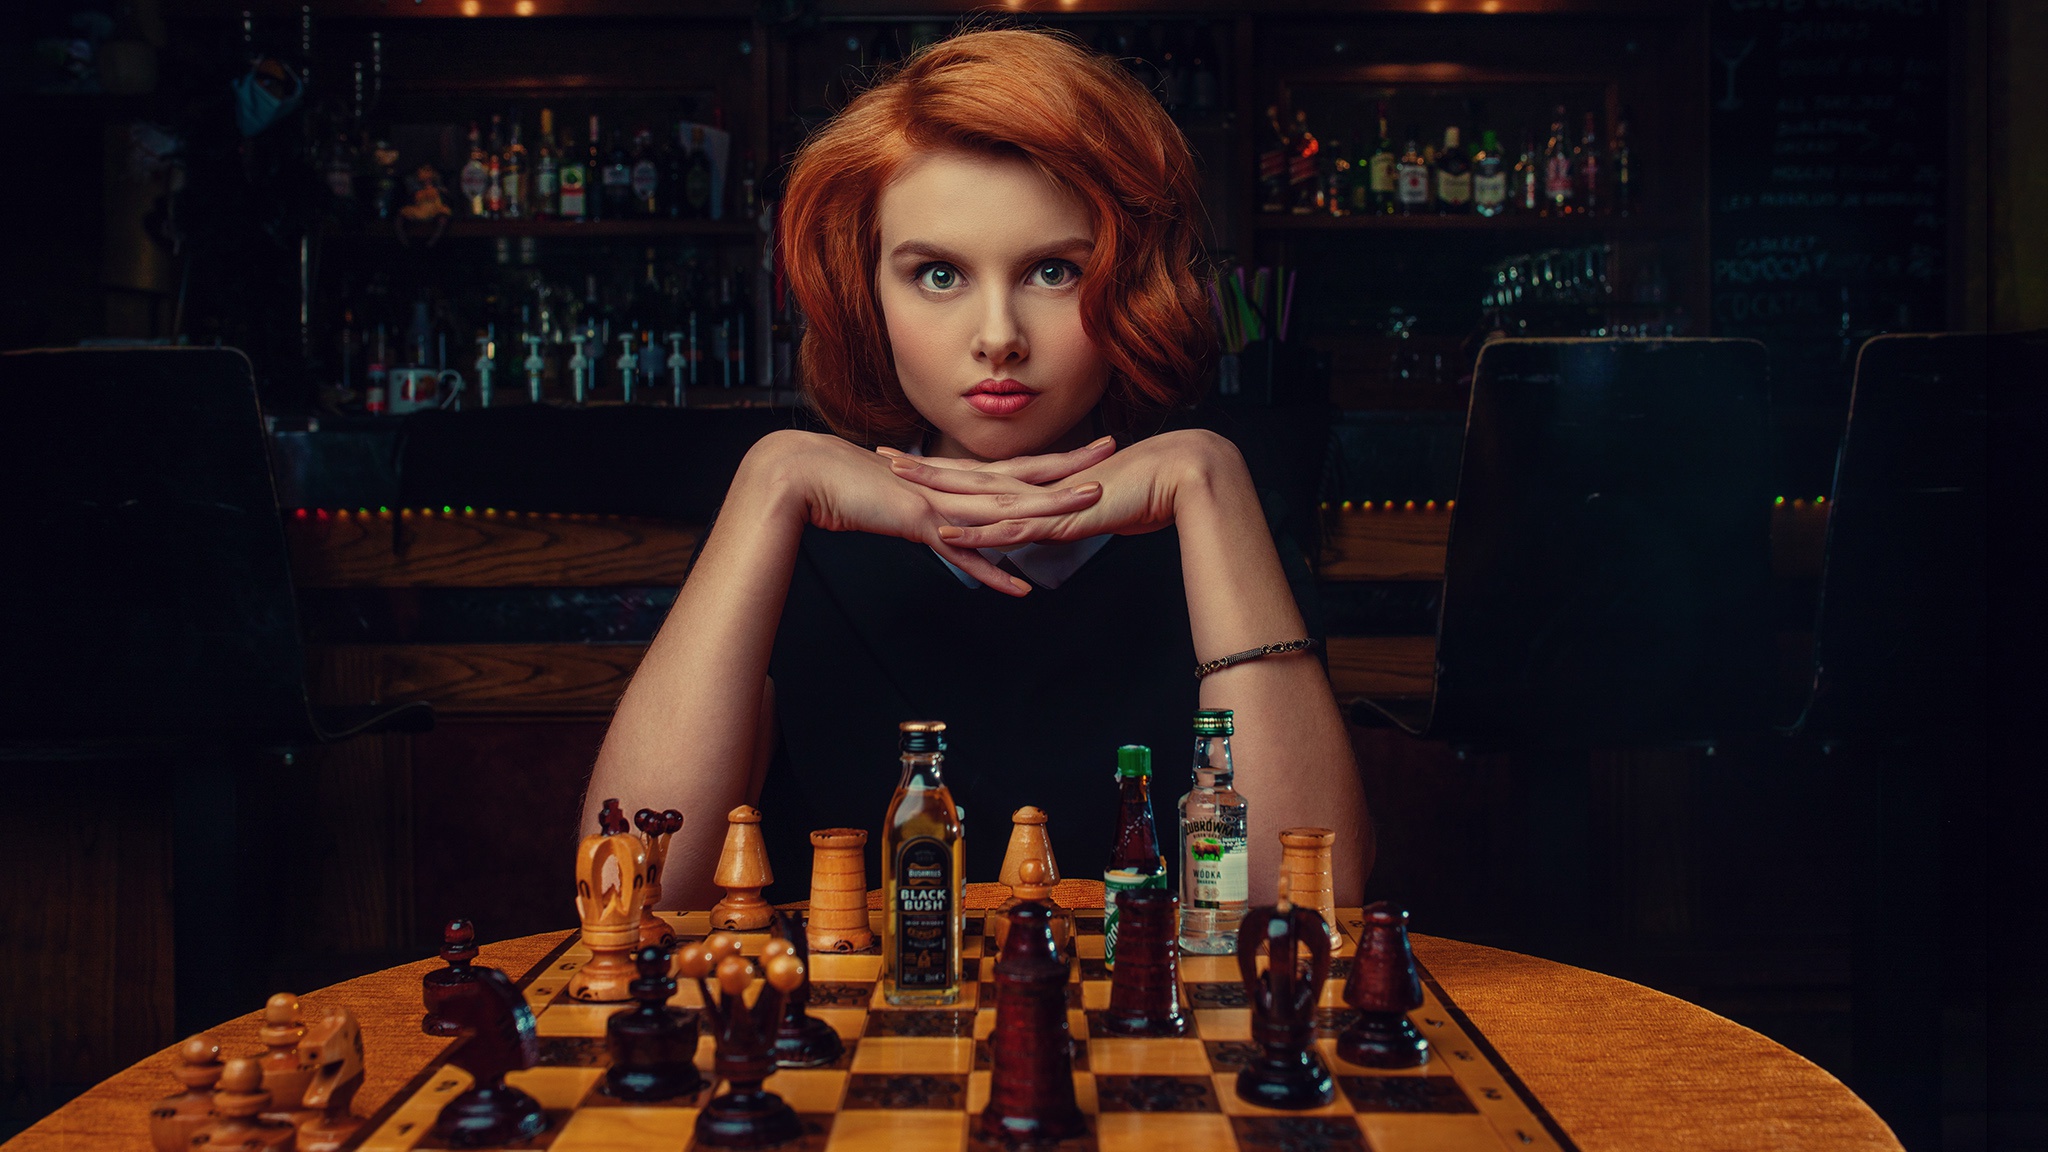 Women Looking At Viewer Chess Board Games Redhead Bottles Makeup Women Indoors Indoors Lipstick Red  2048x1152